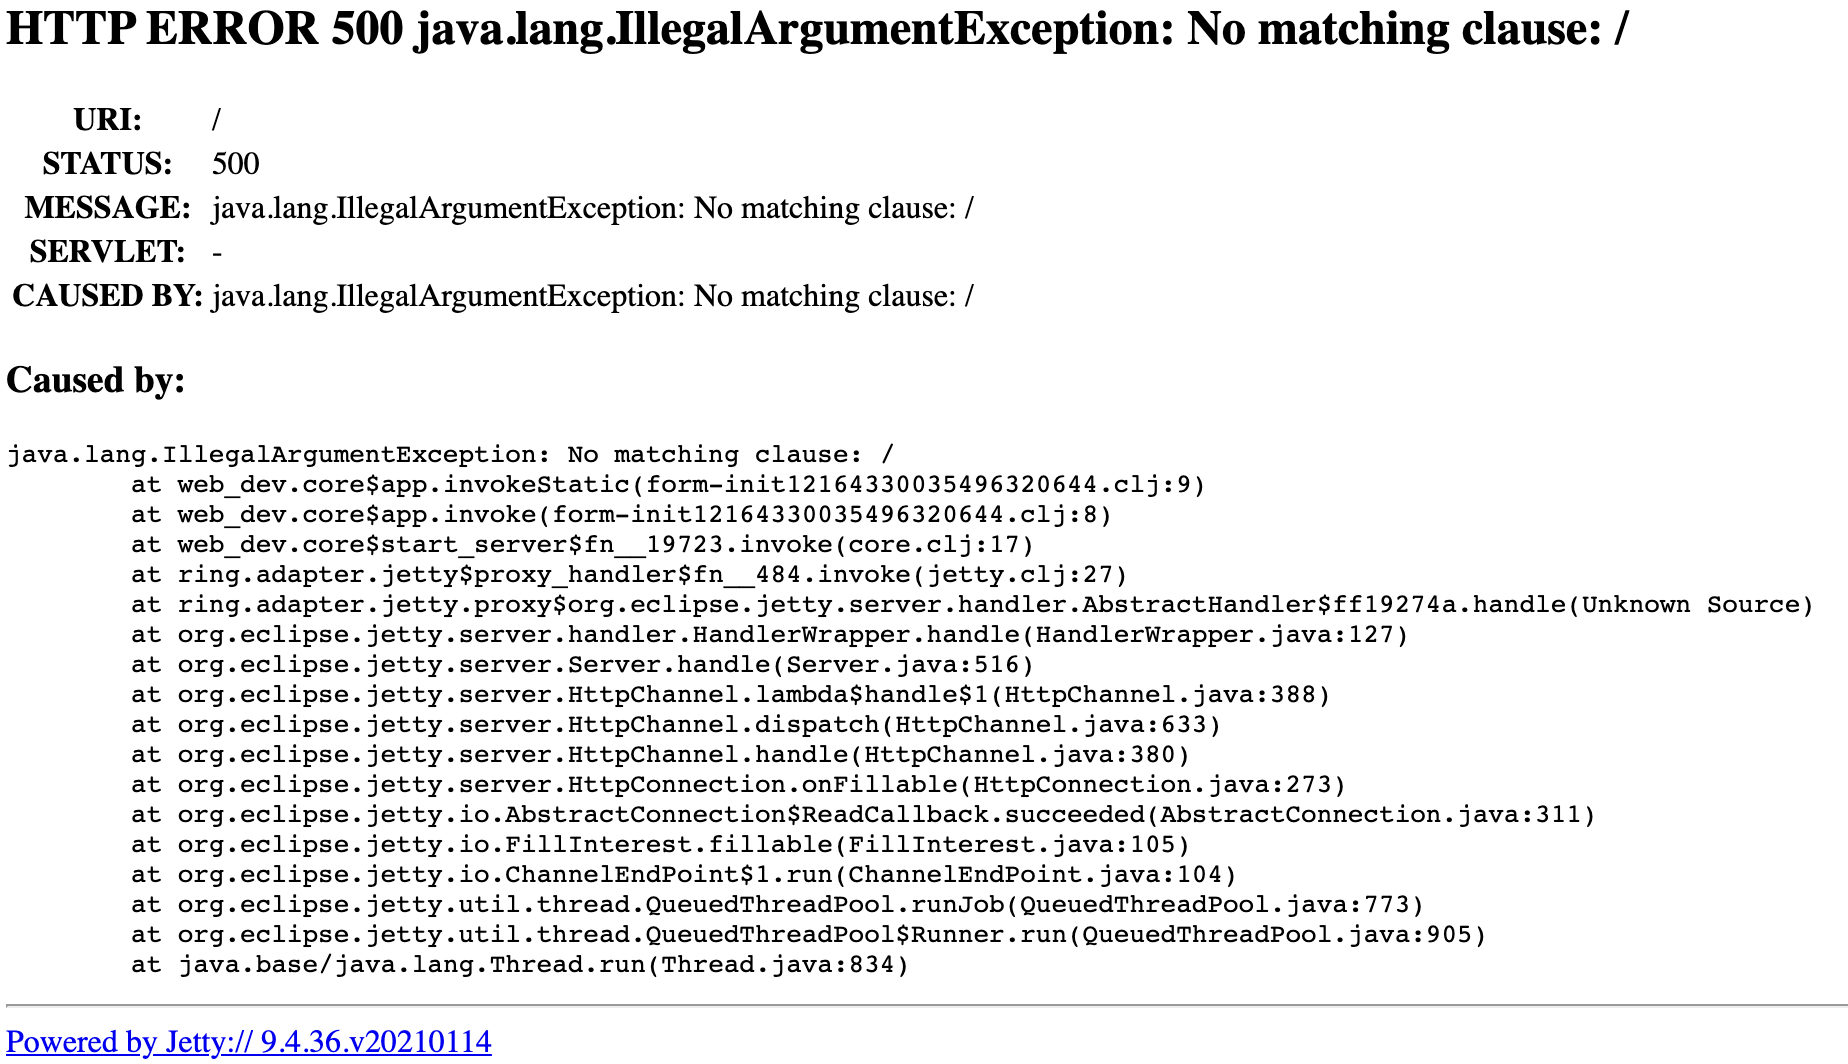 Browser view of Stack Trace for No Matching Clause exception